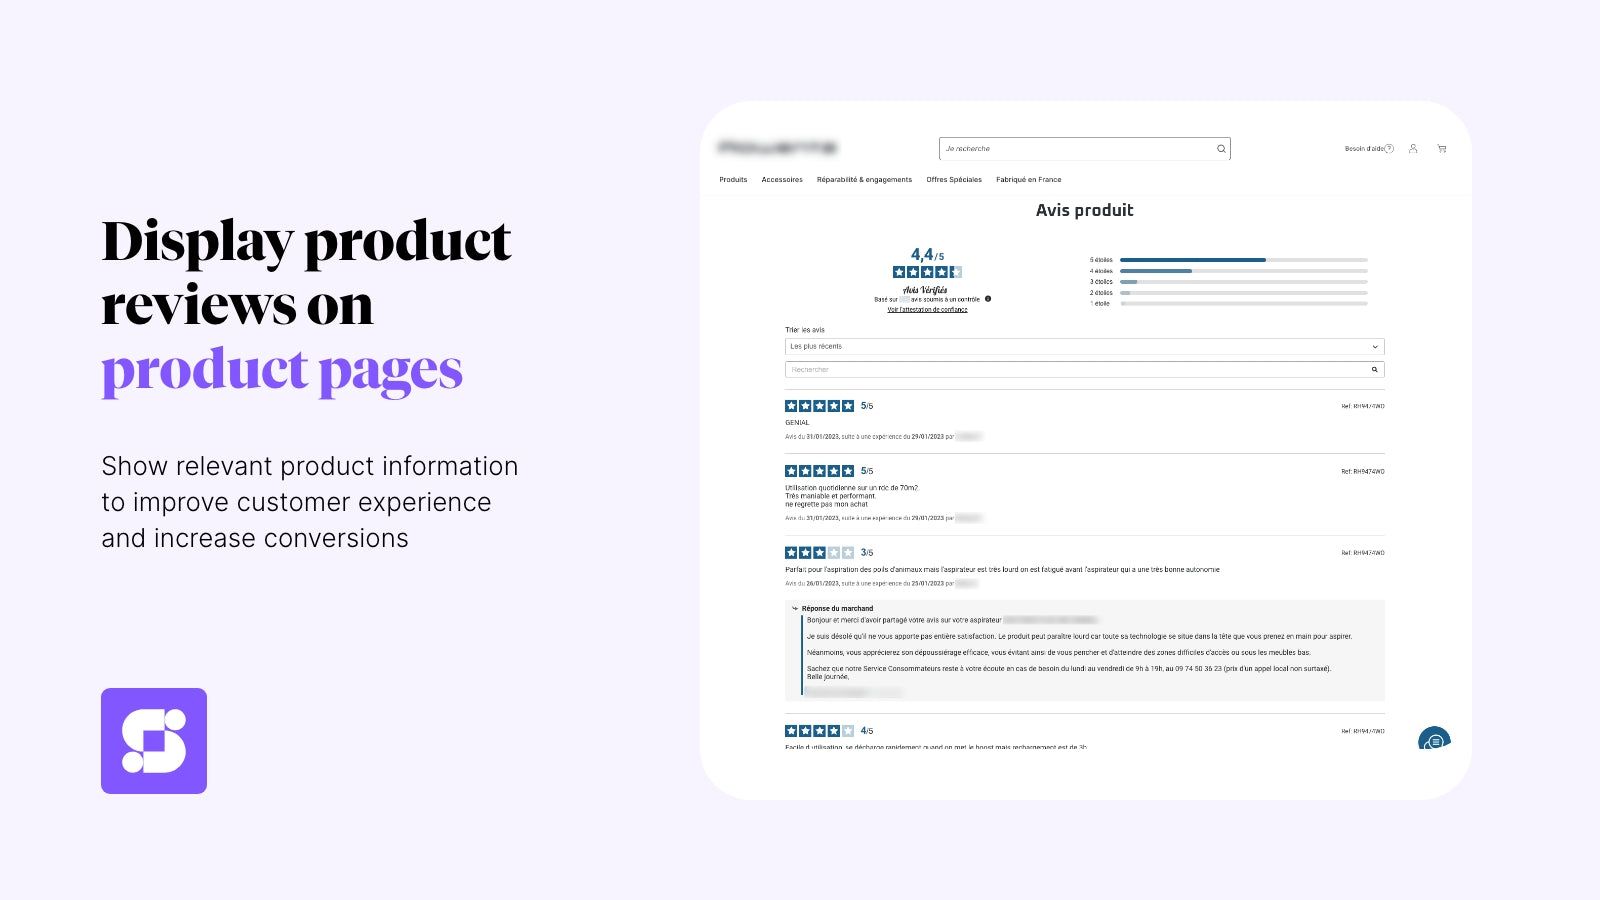 Display product reviews on product pages